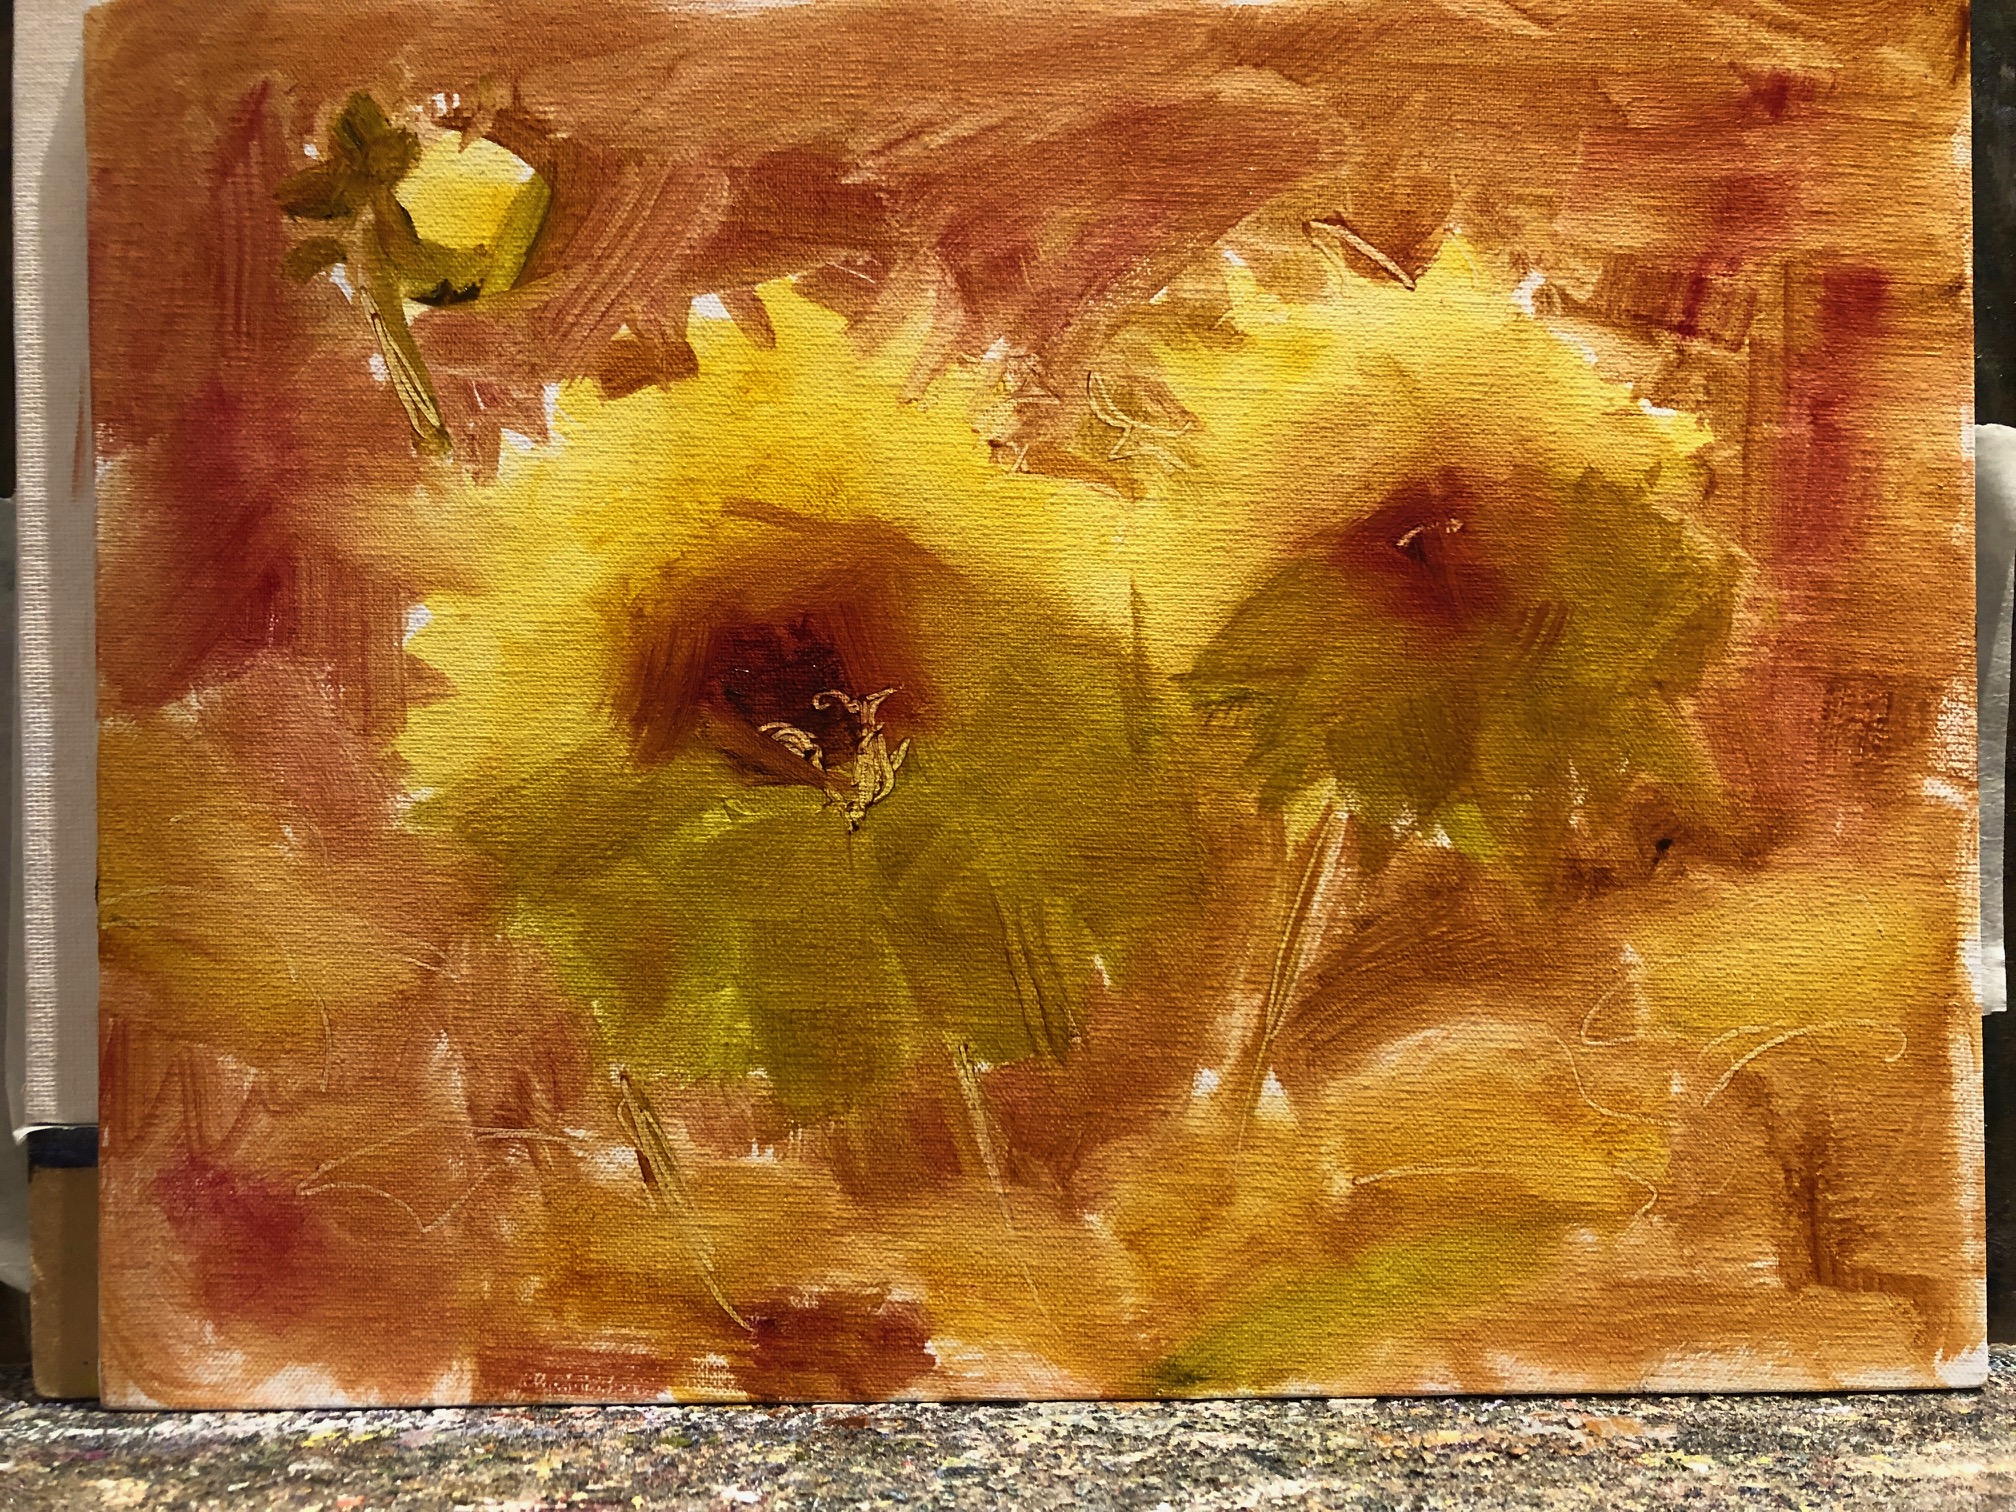 Final painting, “Simply Dahlias,” 9 x 12, oil painting by Pat Fiorello